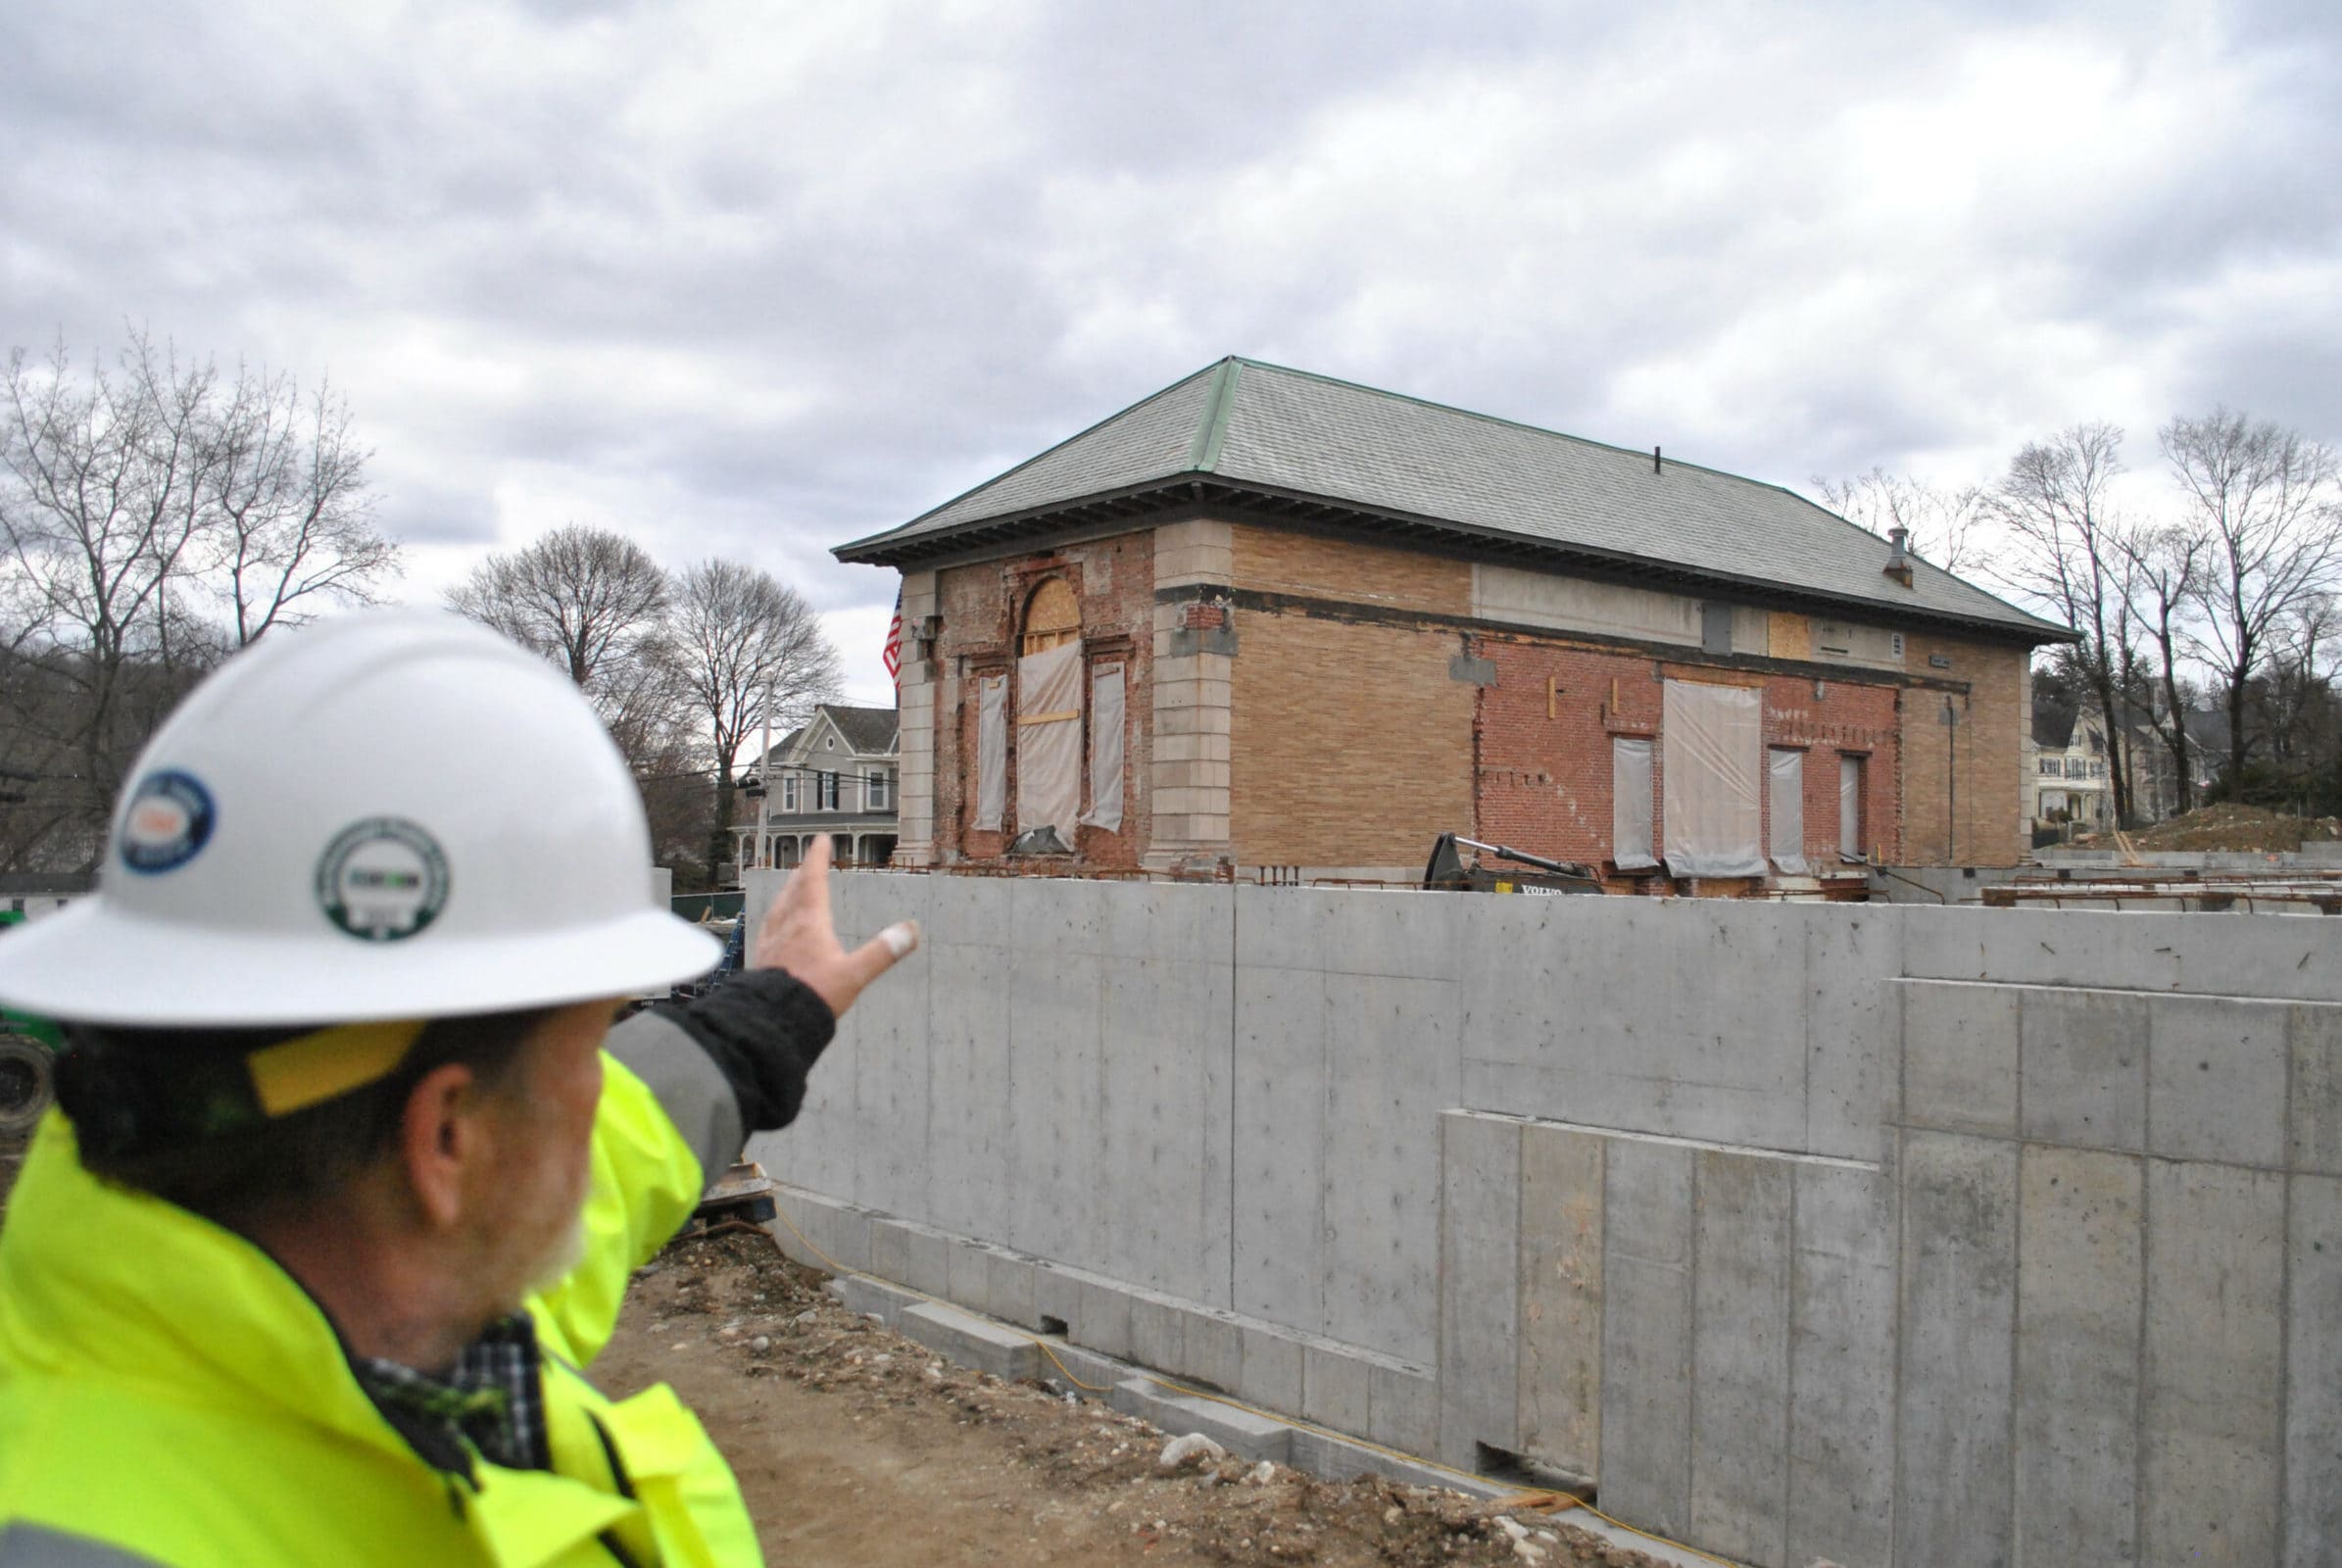 Marlborough library project moving forward after busy winter